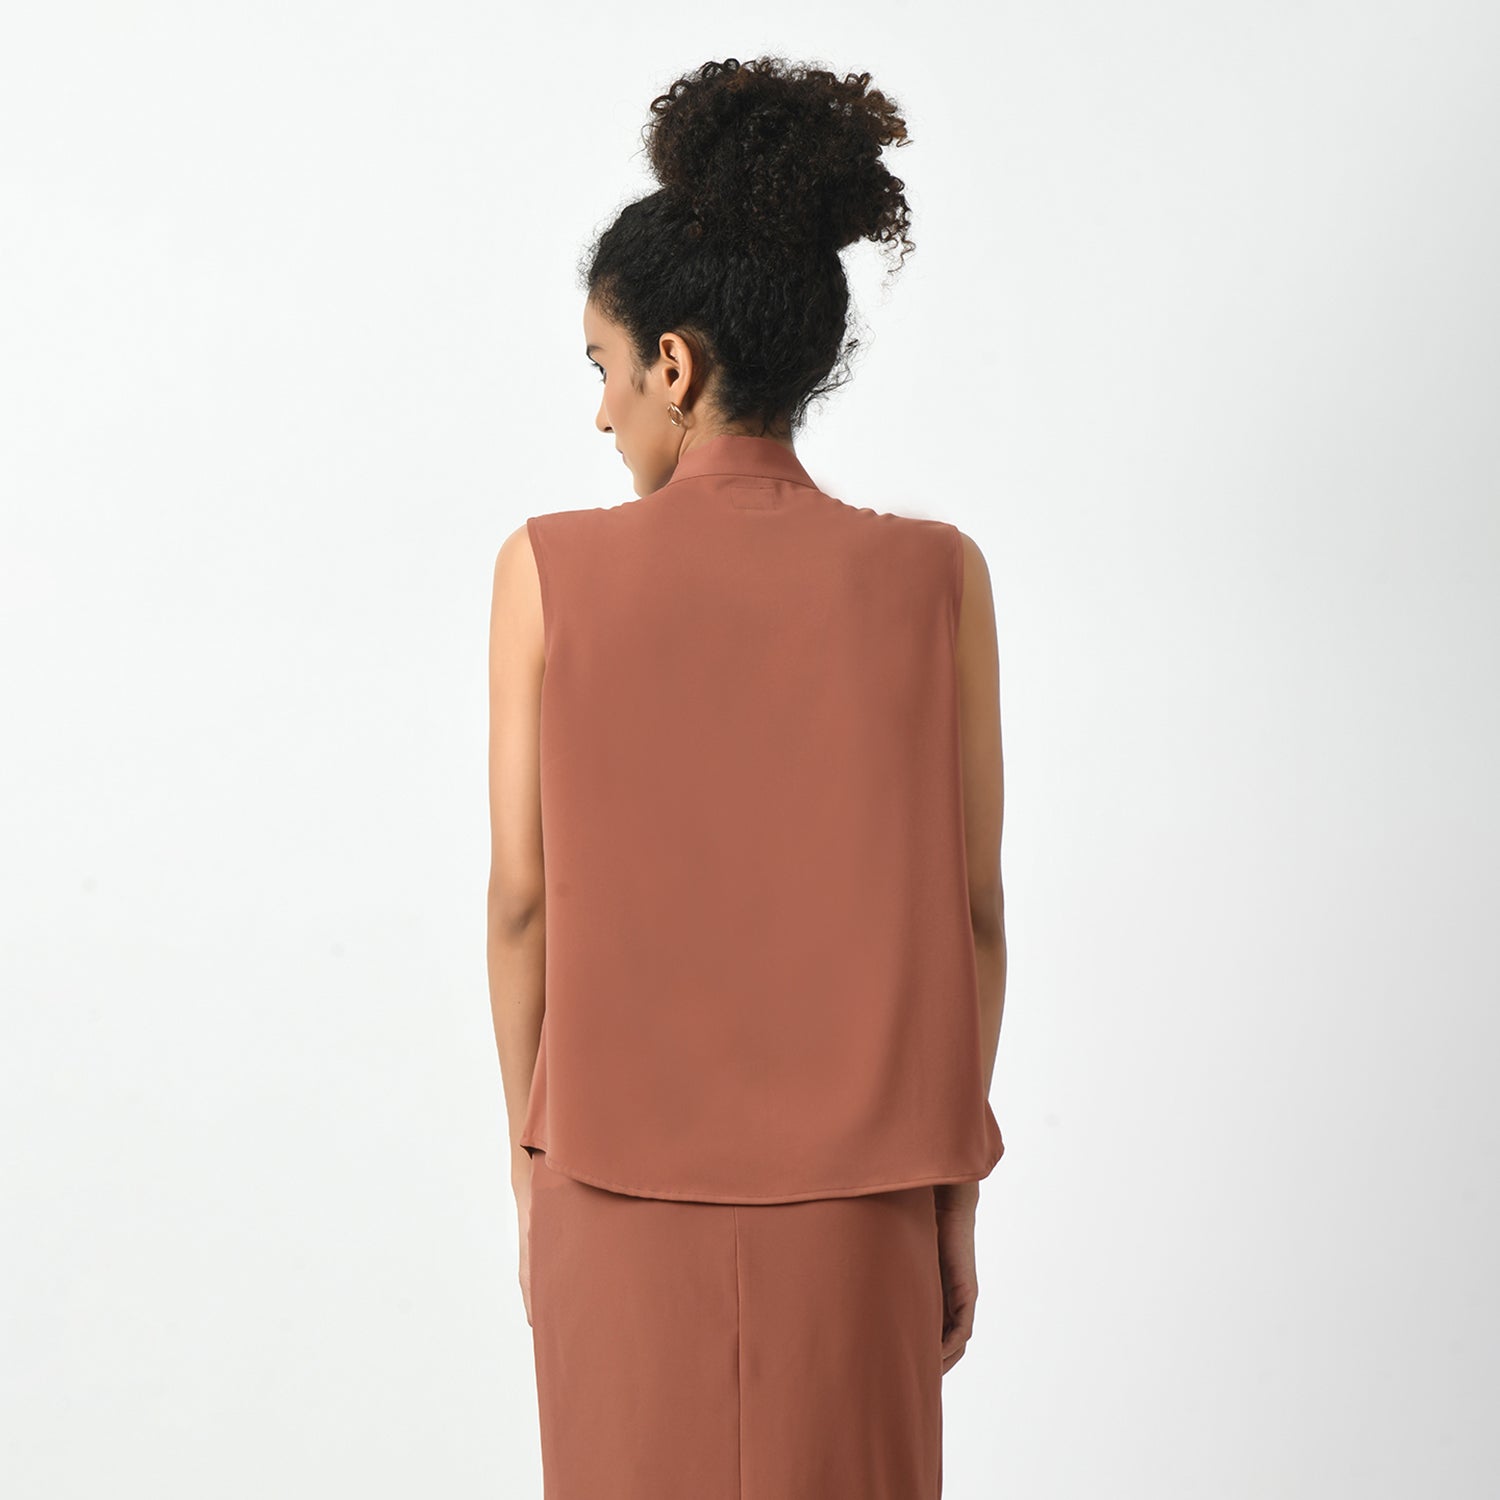 Peach Sleeveless Top With Knot